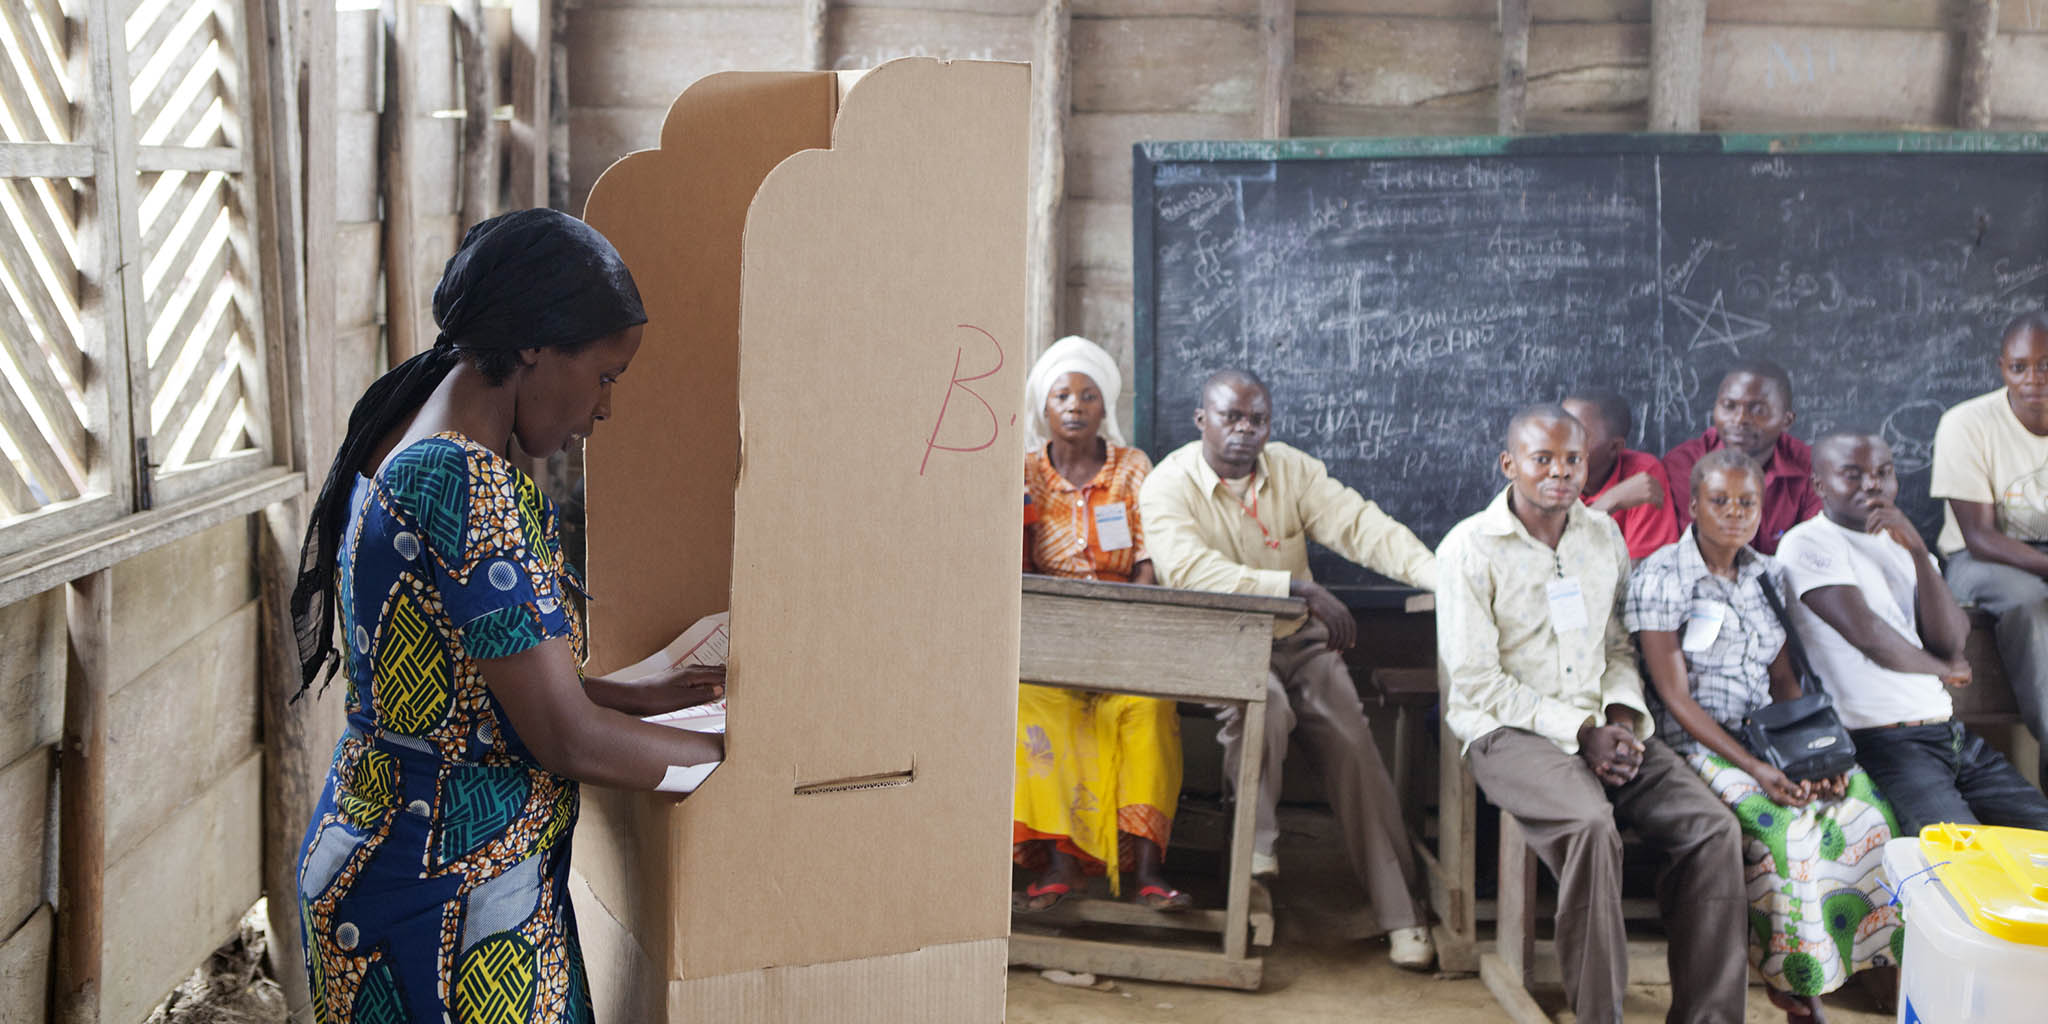 A woman casts her ballot during presidential and legislative elections in Walikale, Democratic Republic of the Congo. November 28, 2011. (Sylvain Liechti/ MONUSCO)